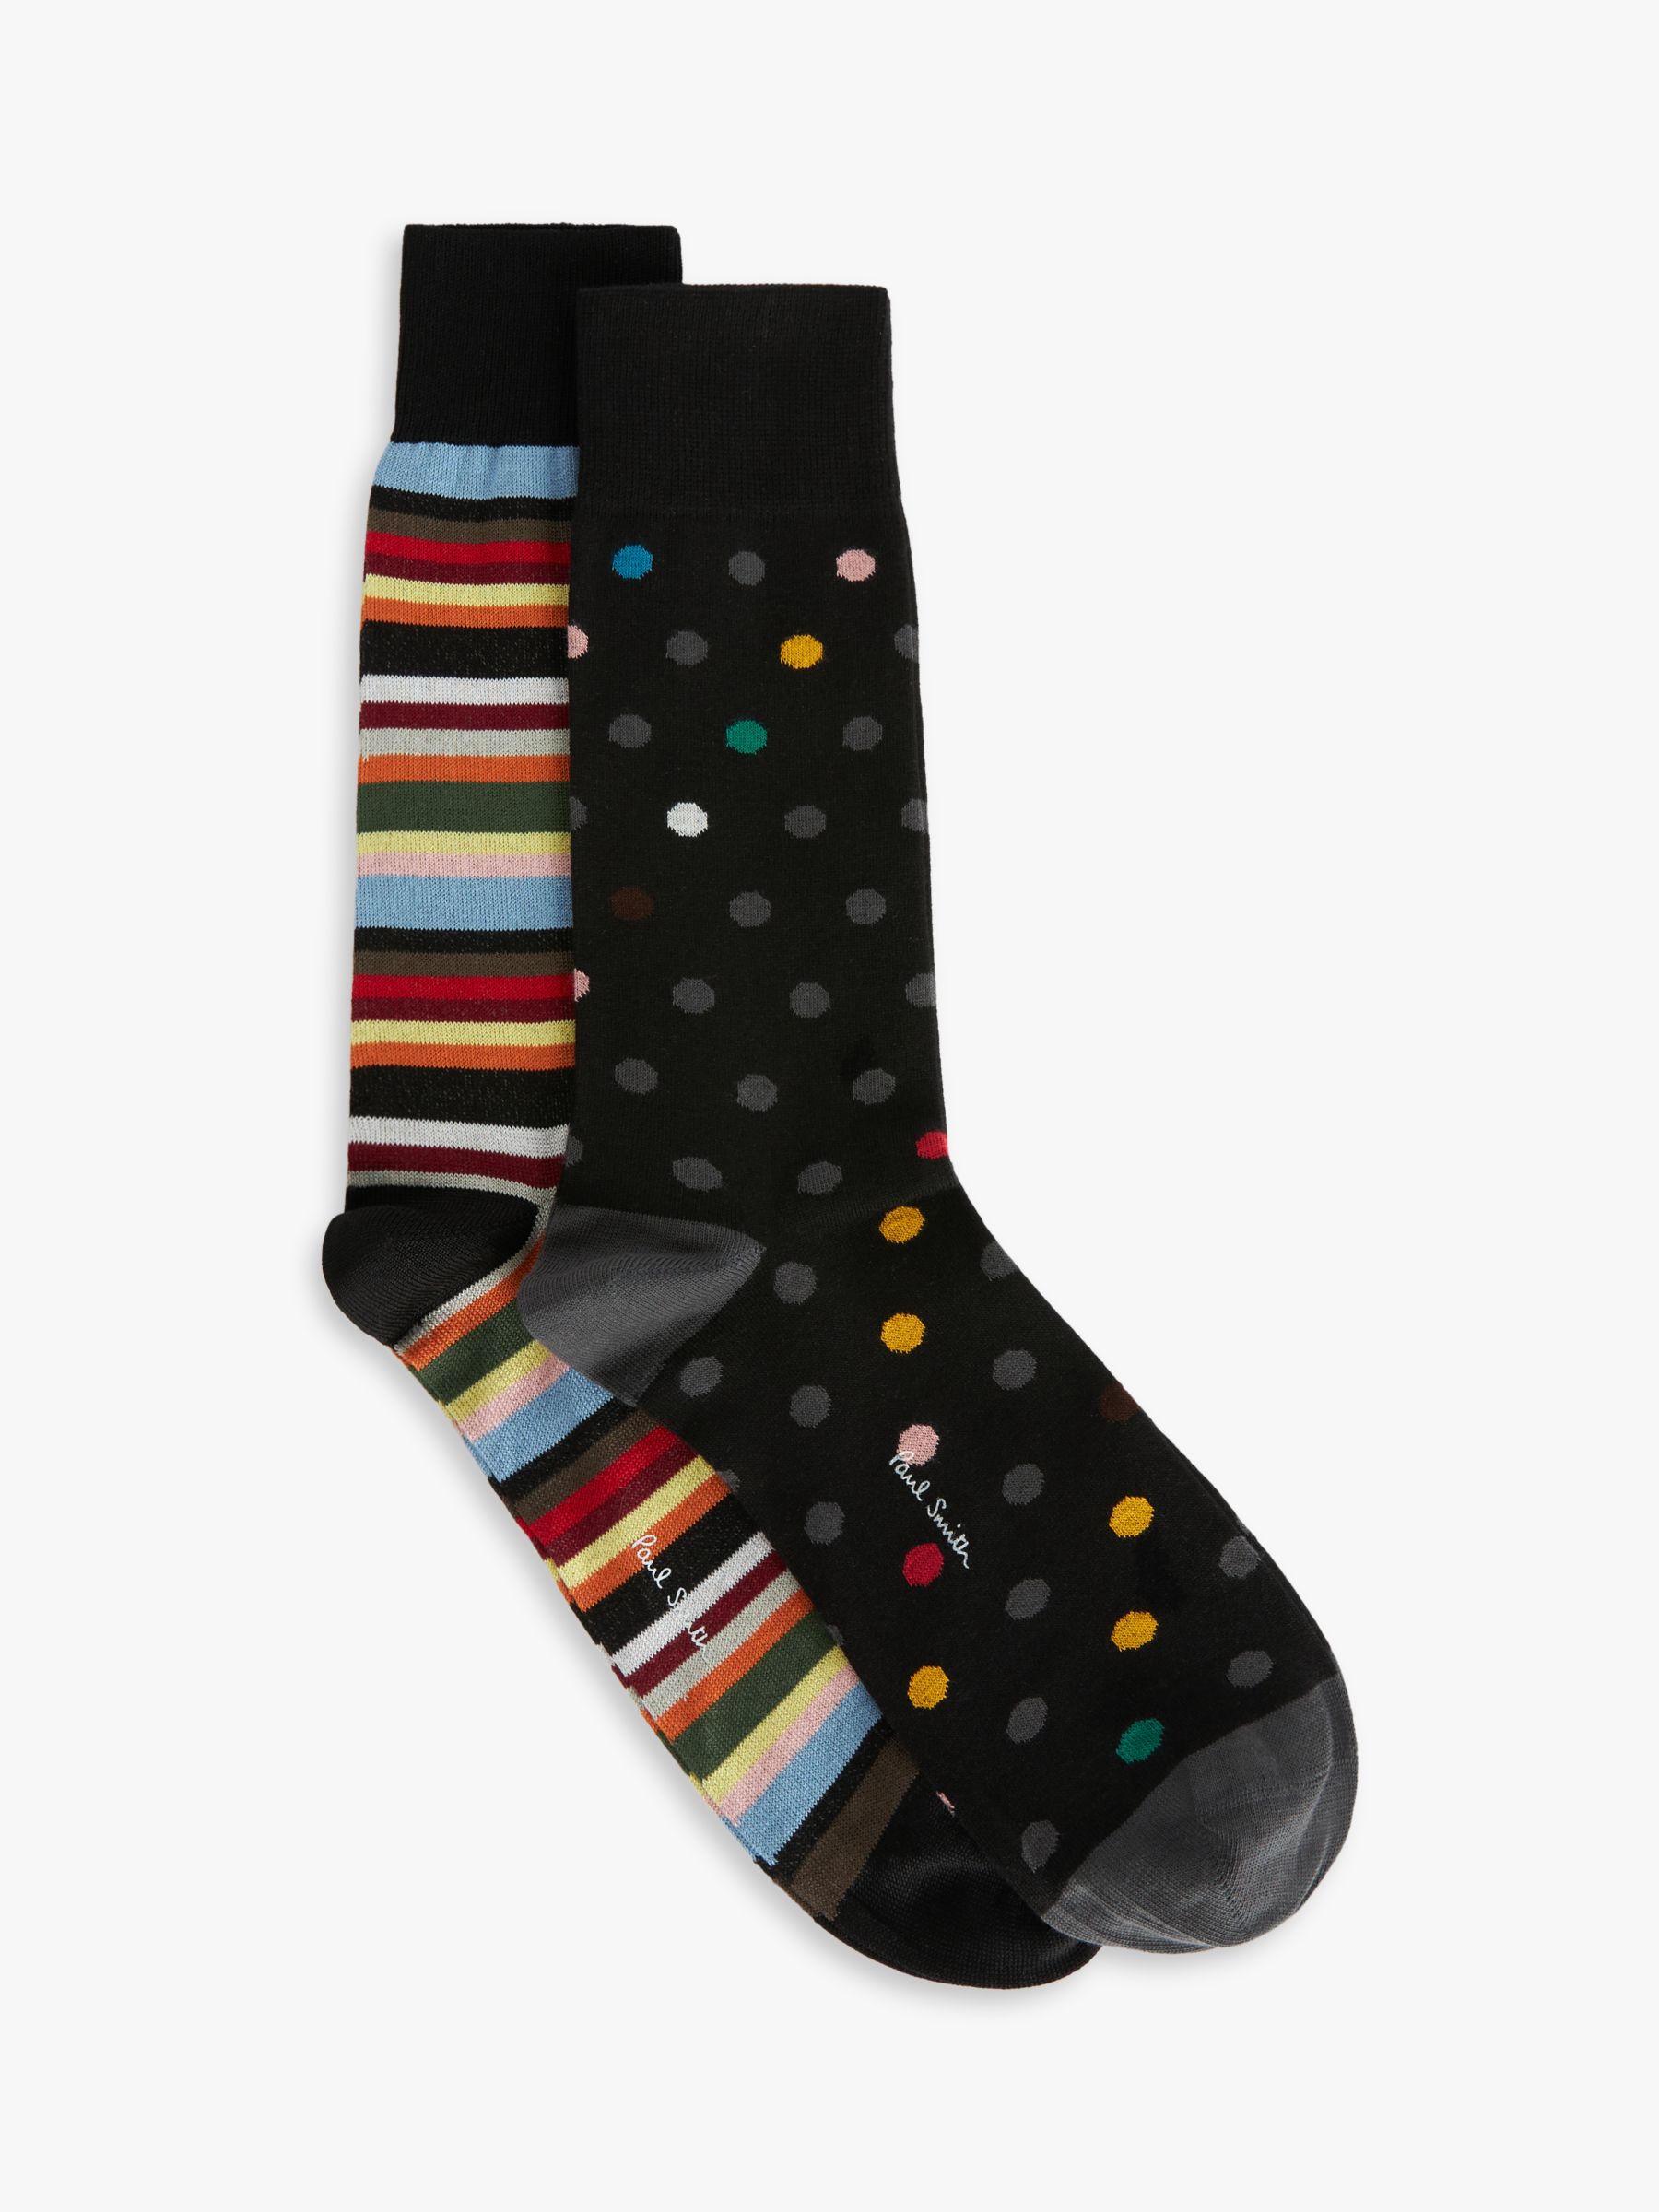 Paul Smith Exclusive Stripe/Spot Socks, Pack of 2, Multi, One Size